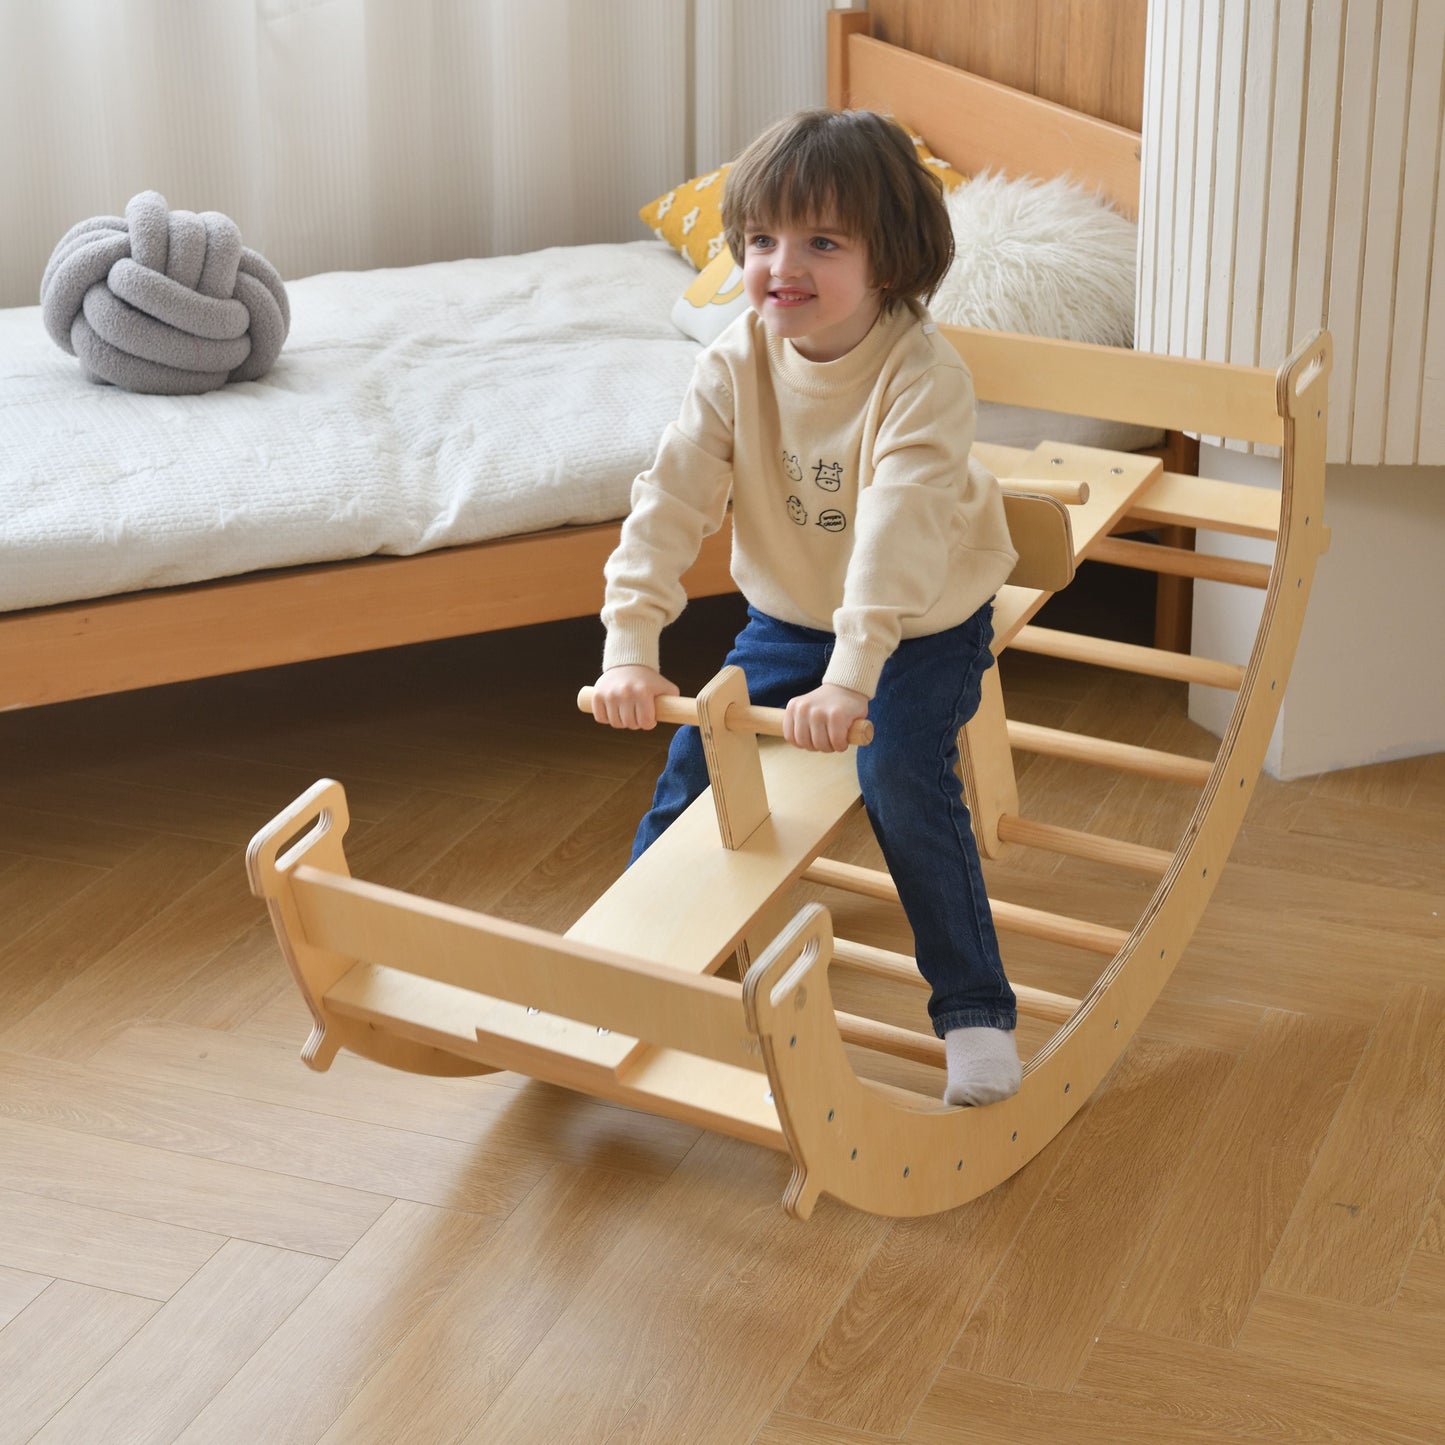 Bazel - Pikler 6-in-1  Climber with Rocker Arch and Slide Set by Avenlur